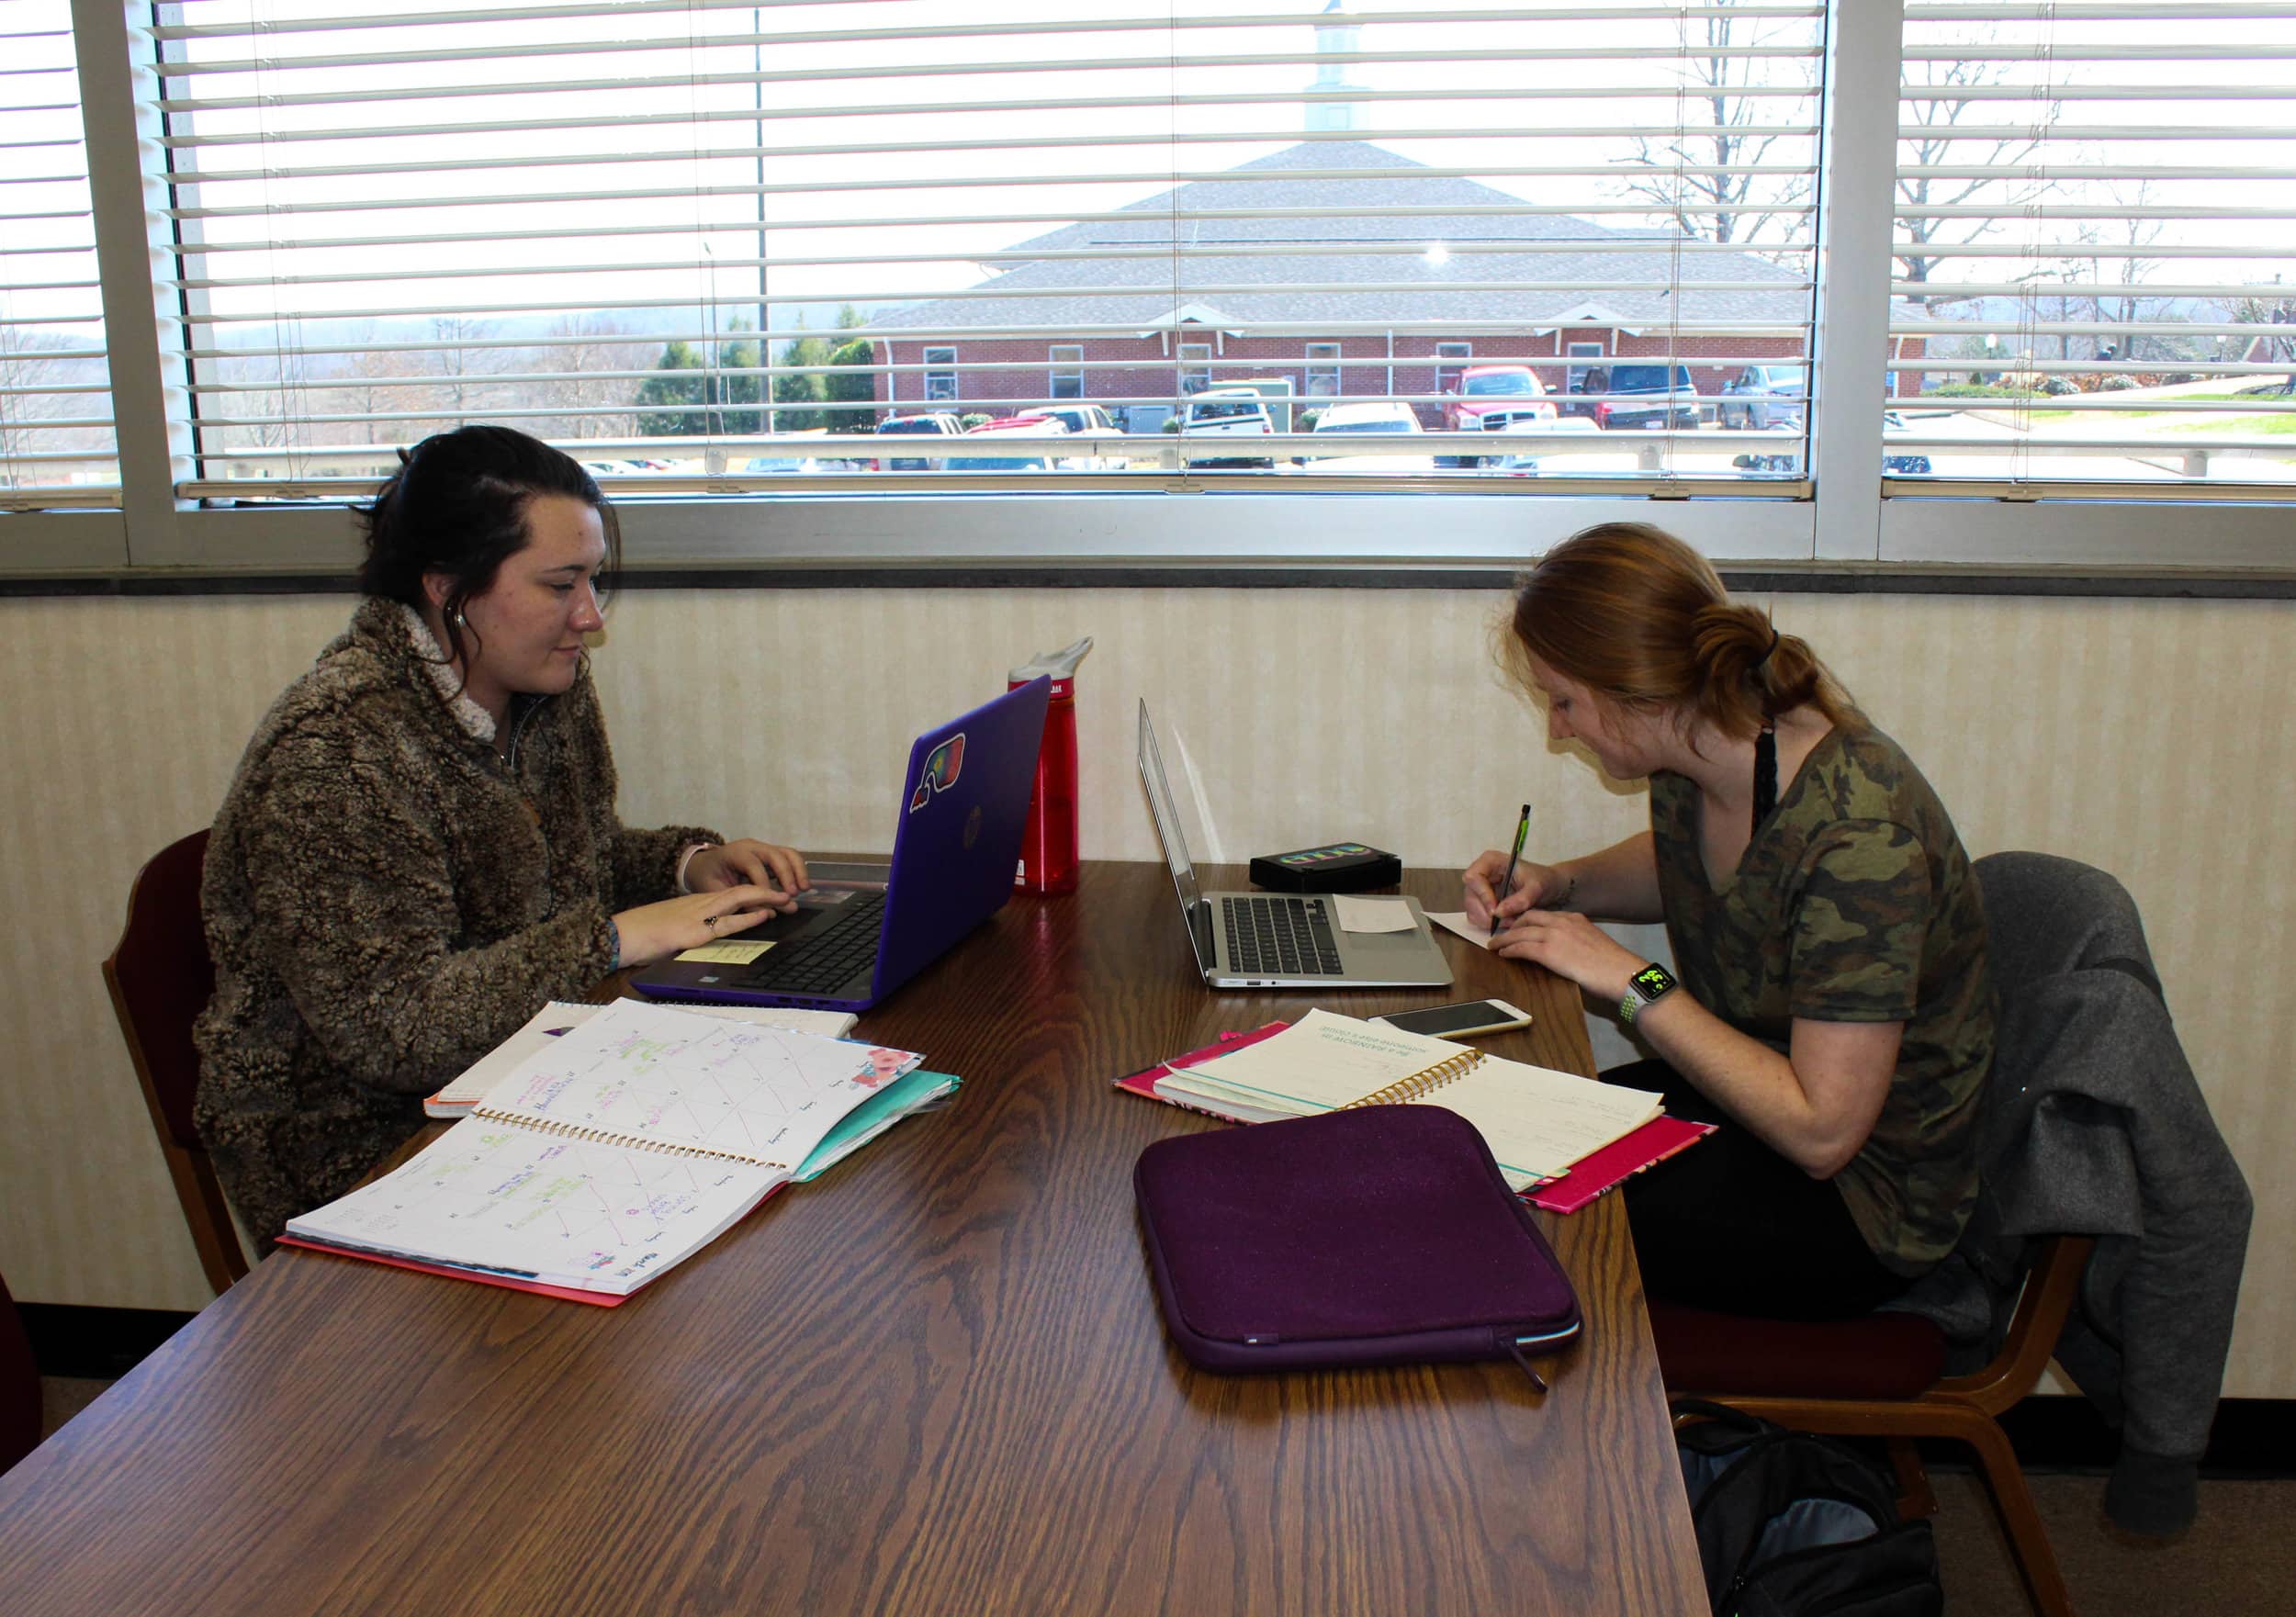 Freshman elementary education major Breanna Edwards and freshman sports management major Leah Elliot sit together in the library as they study various assignments.